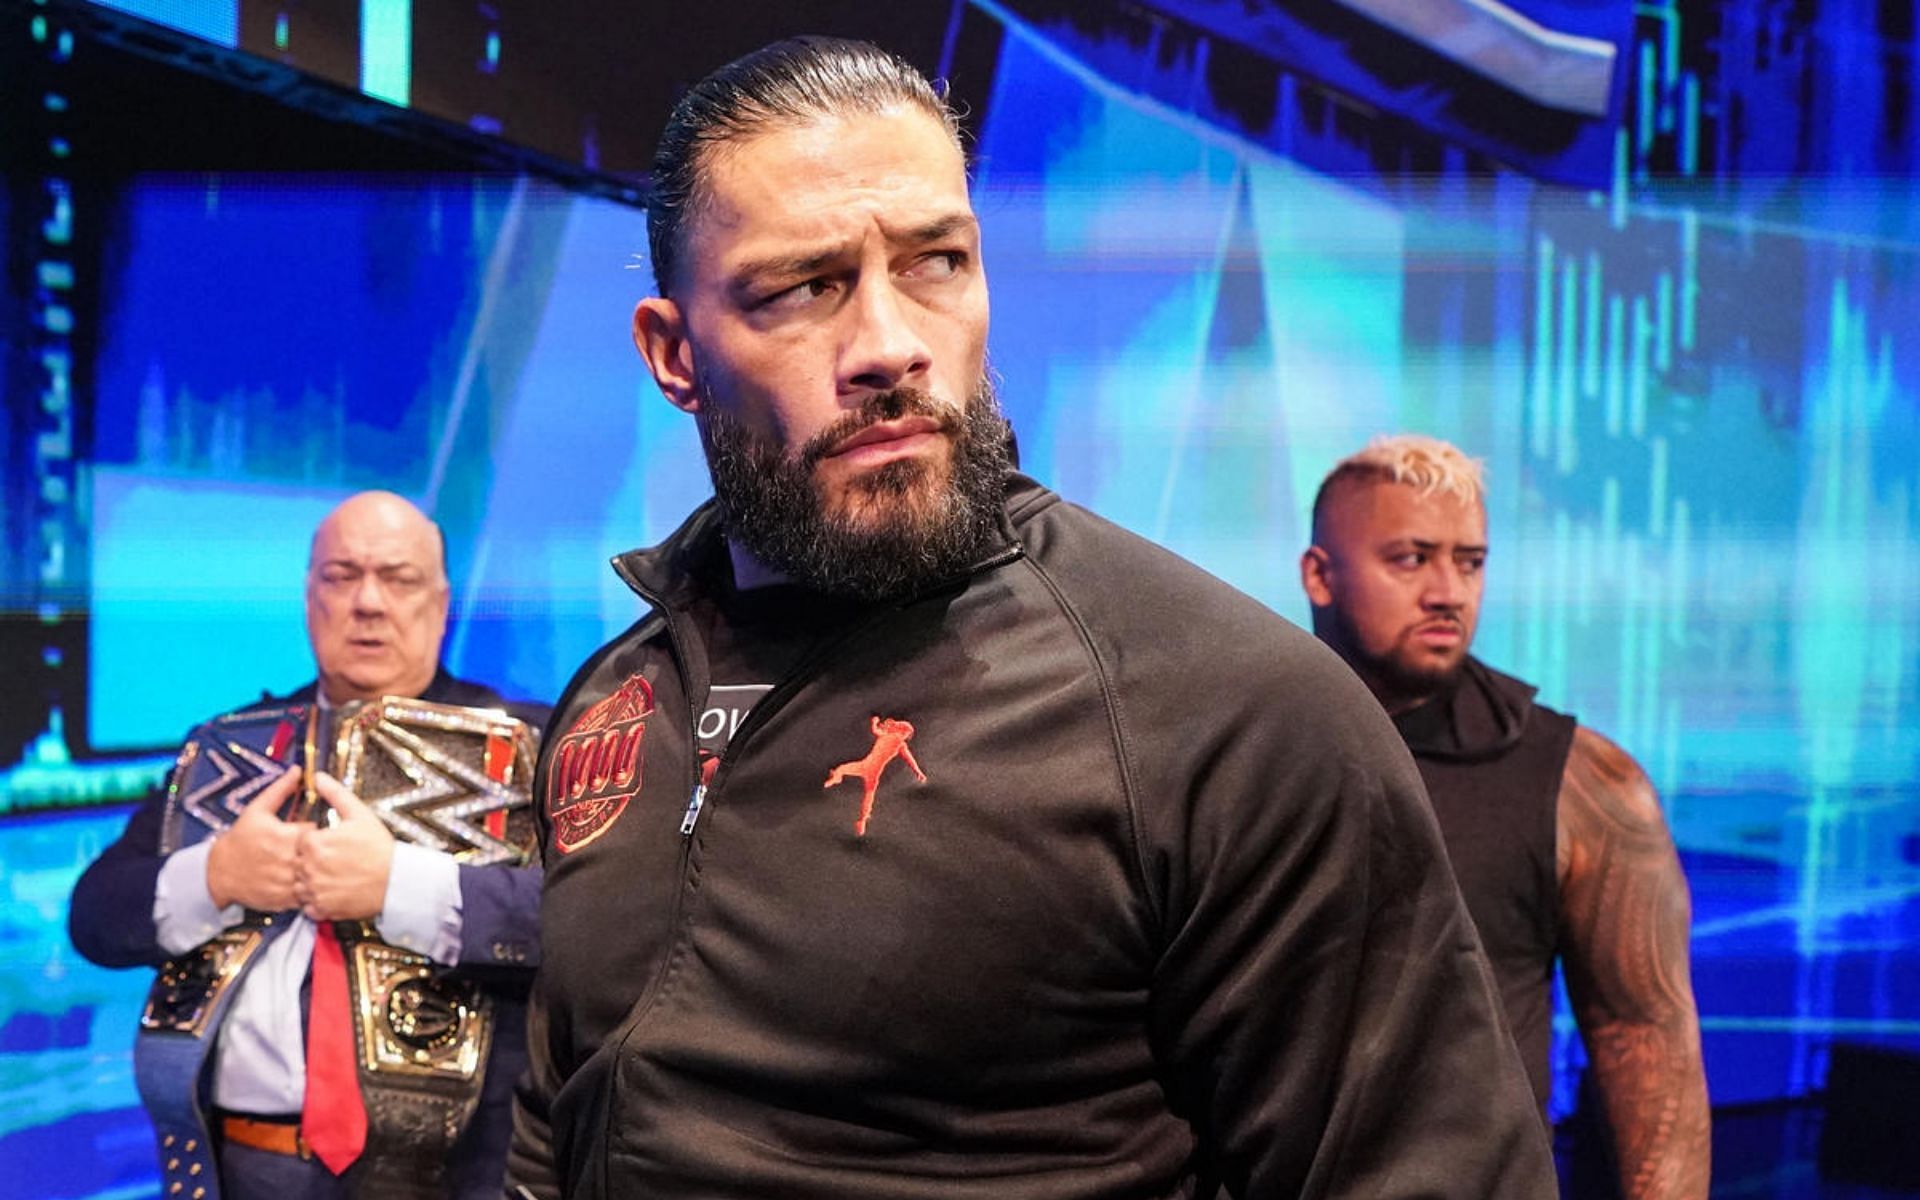 Fans would hate if Reigns did what Vince Russo suggests